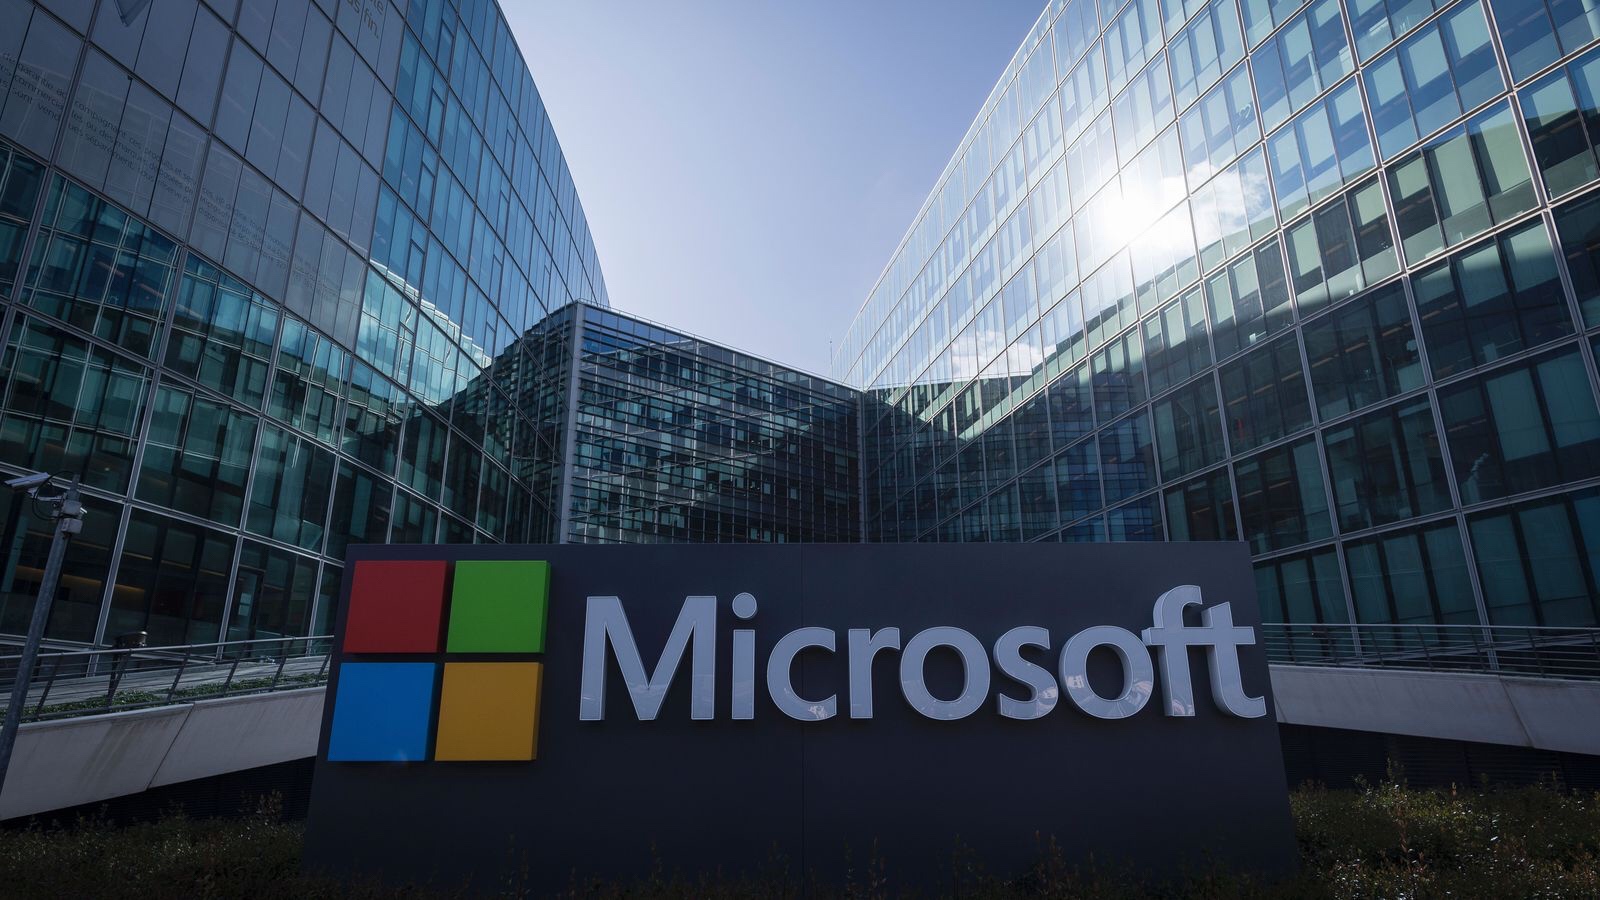 Microsoft is apparently facing 238 complaints of gender discrimination